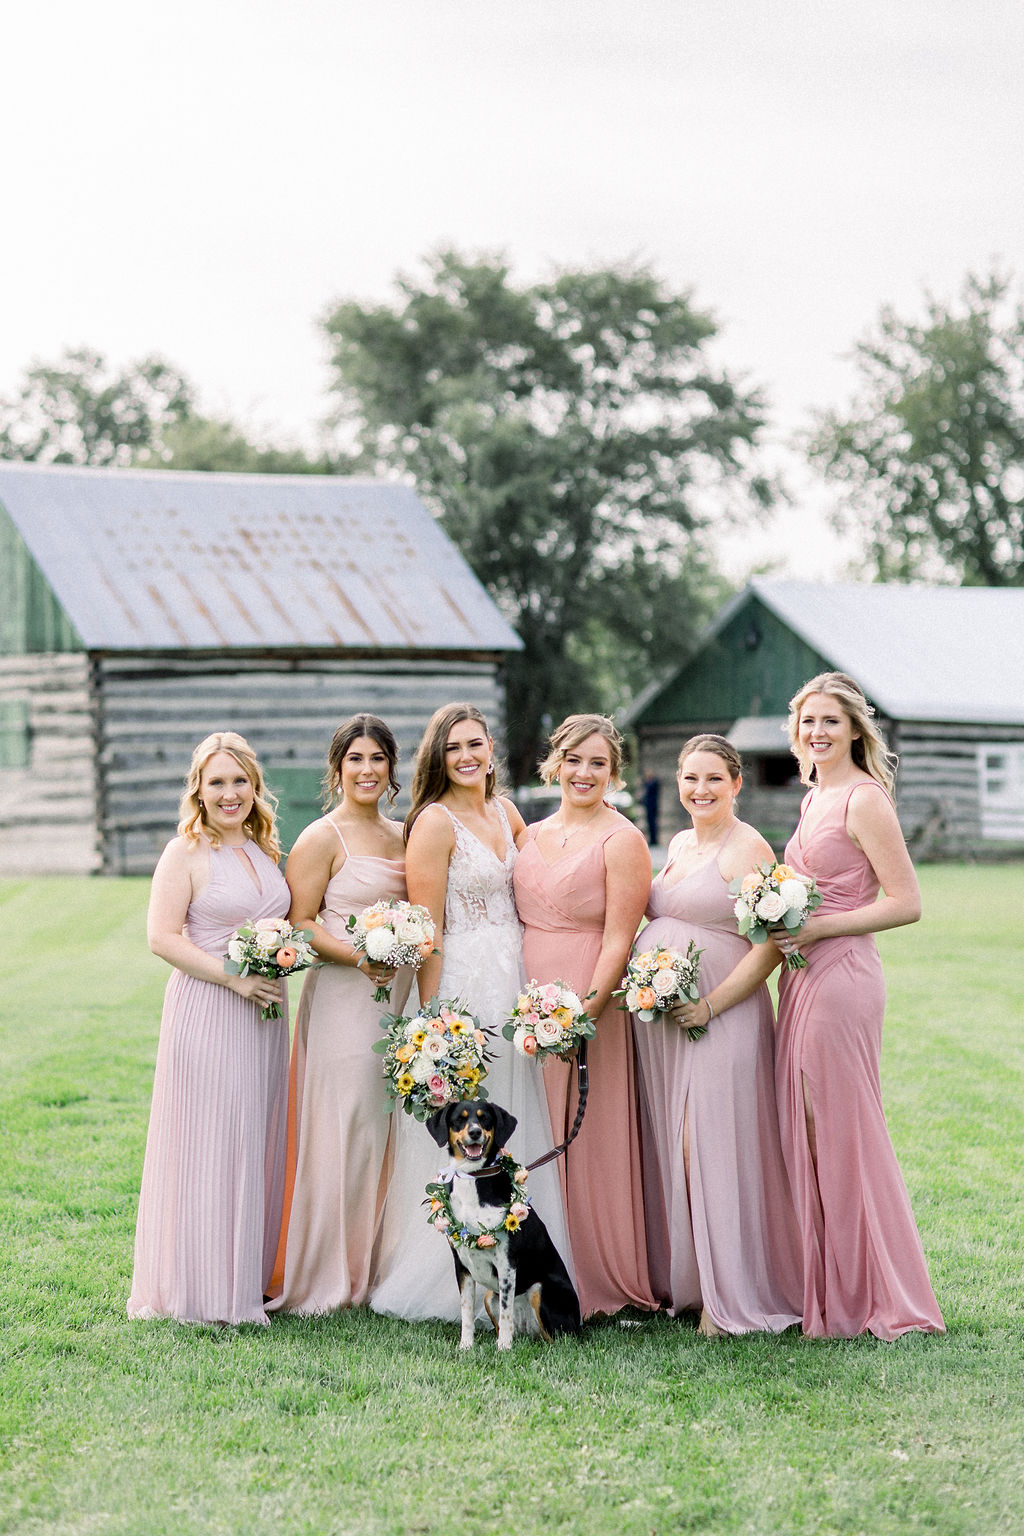 Floral Reef Designs Ottawa Wedding Florist - Amy Pinder Photography - Stonefields Estate wedding - portrait of bride and bridesmaids with puppy, all holding and wearing soft pastel bouquets